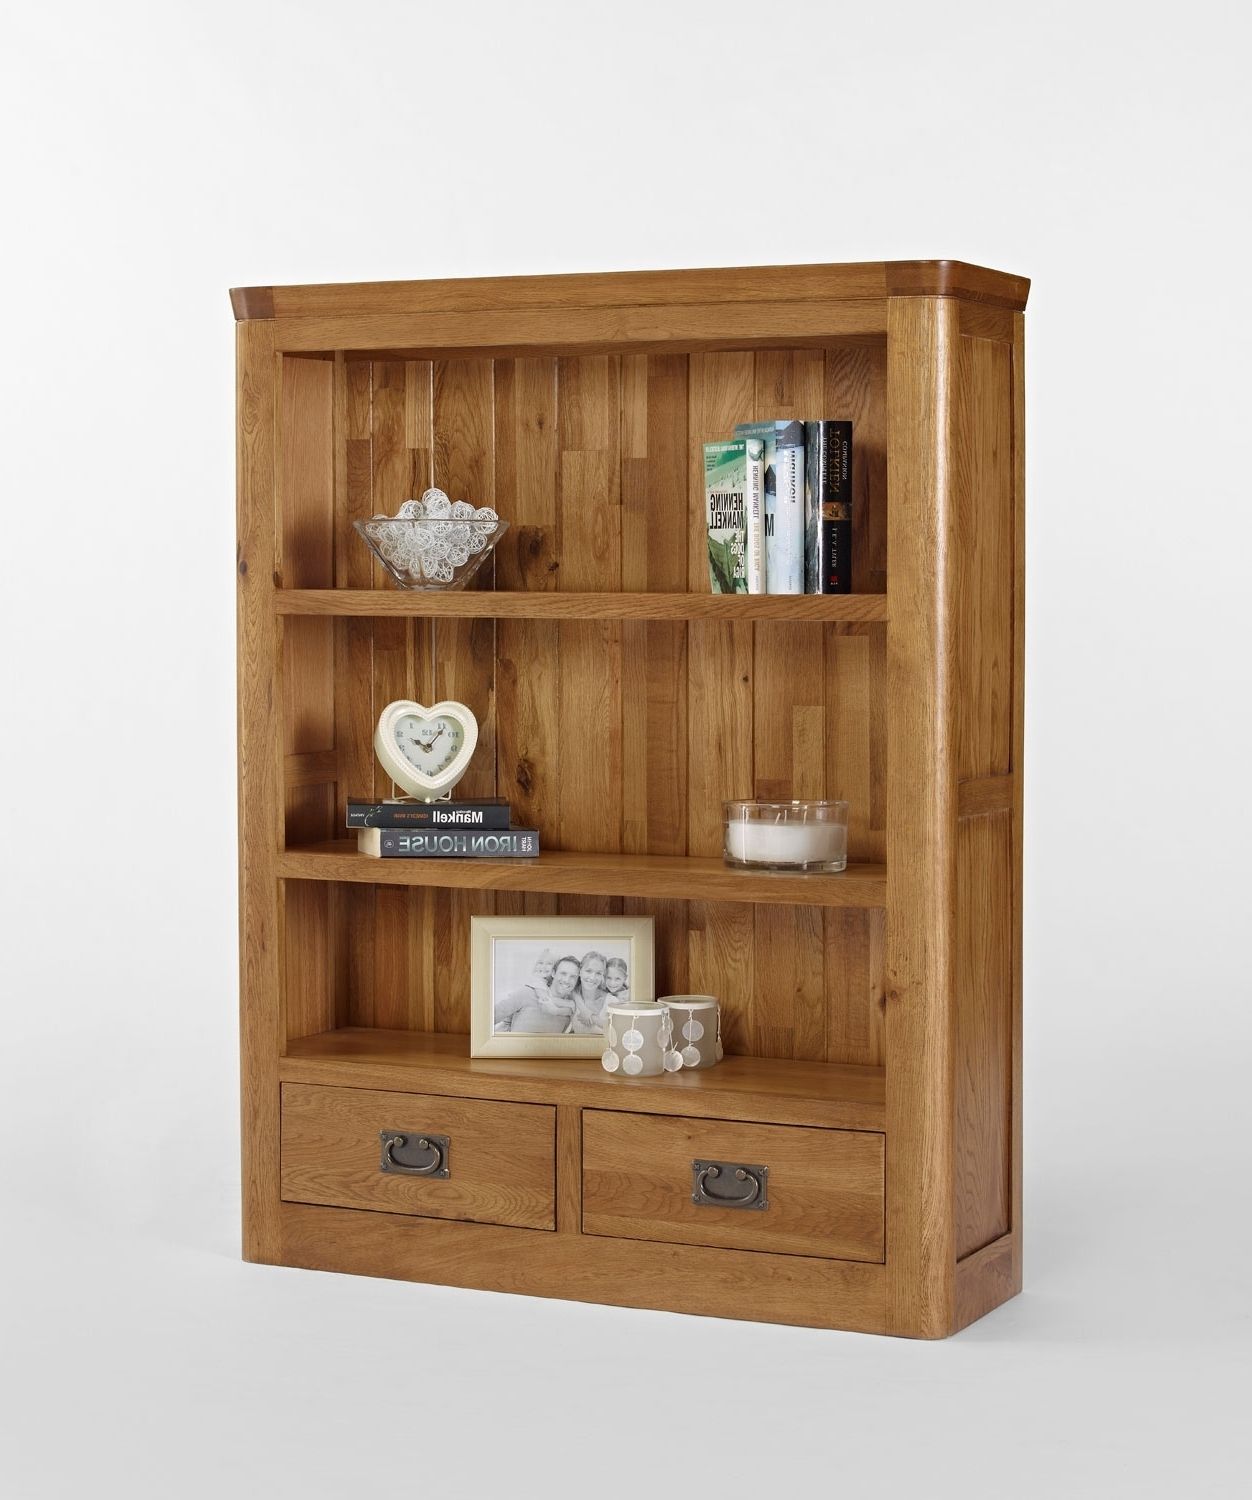 Contemporary Oak Bookcases Within Popular Furniture Home: Incredible Small Oak Bookcase With Drawers Photo (View 12 of 15)